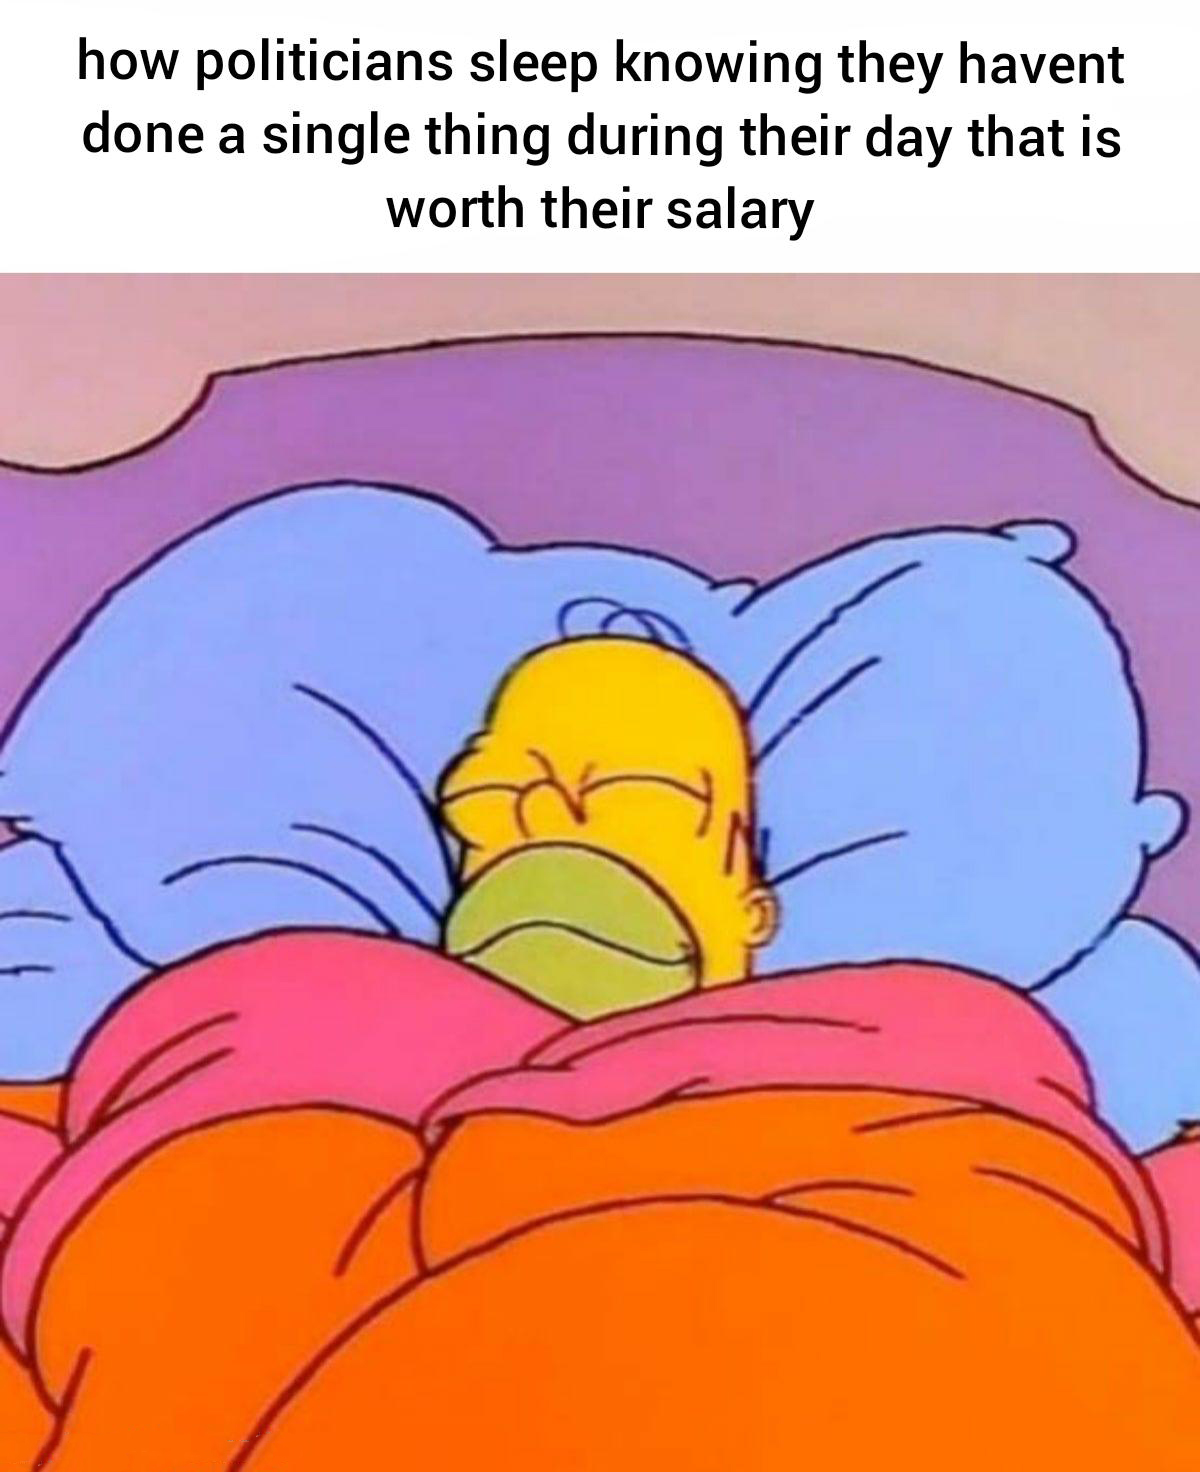 dank memes - funny memes - happy sleeping meme - how politicians sleep knowing they havent done a single thing during their day that is worth their salary